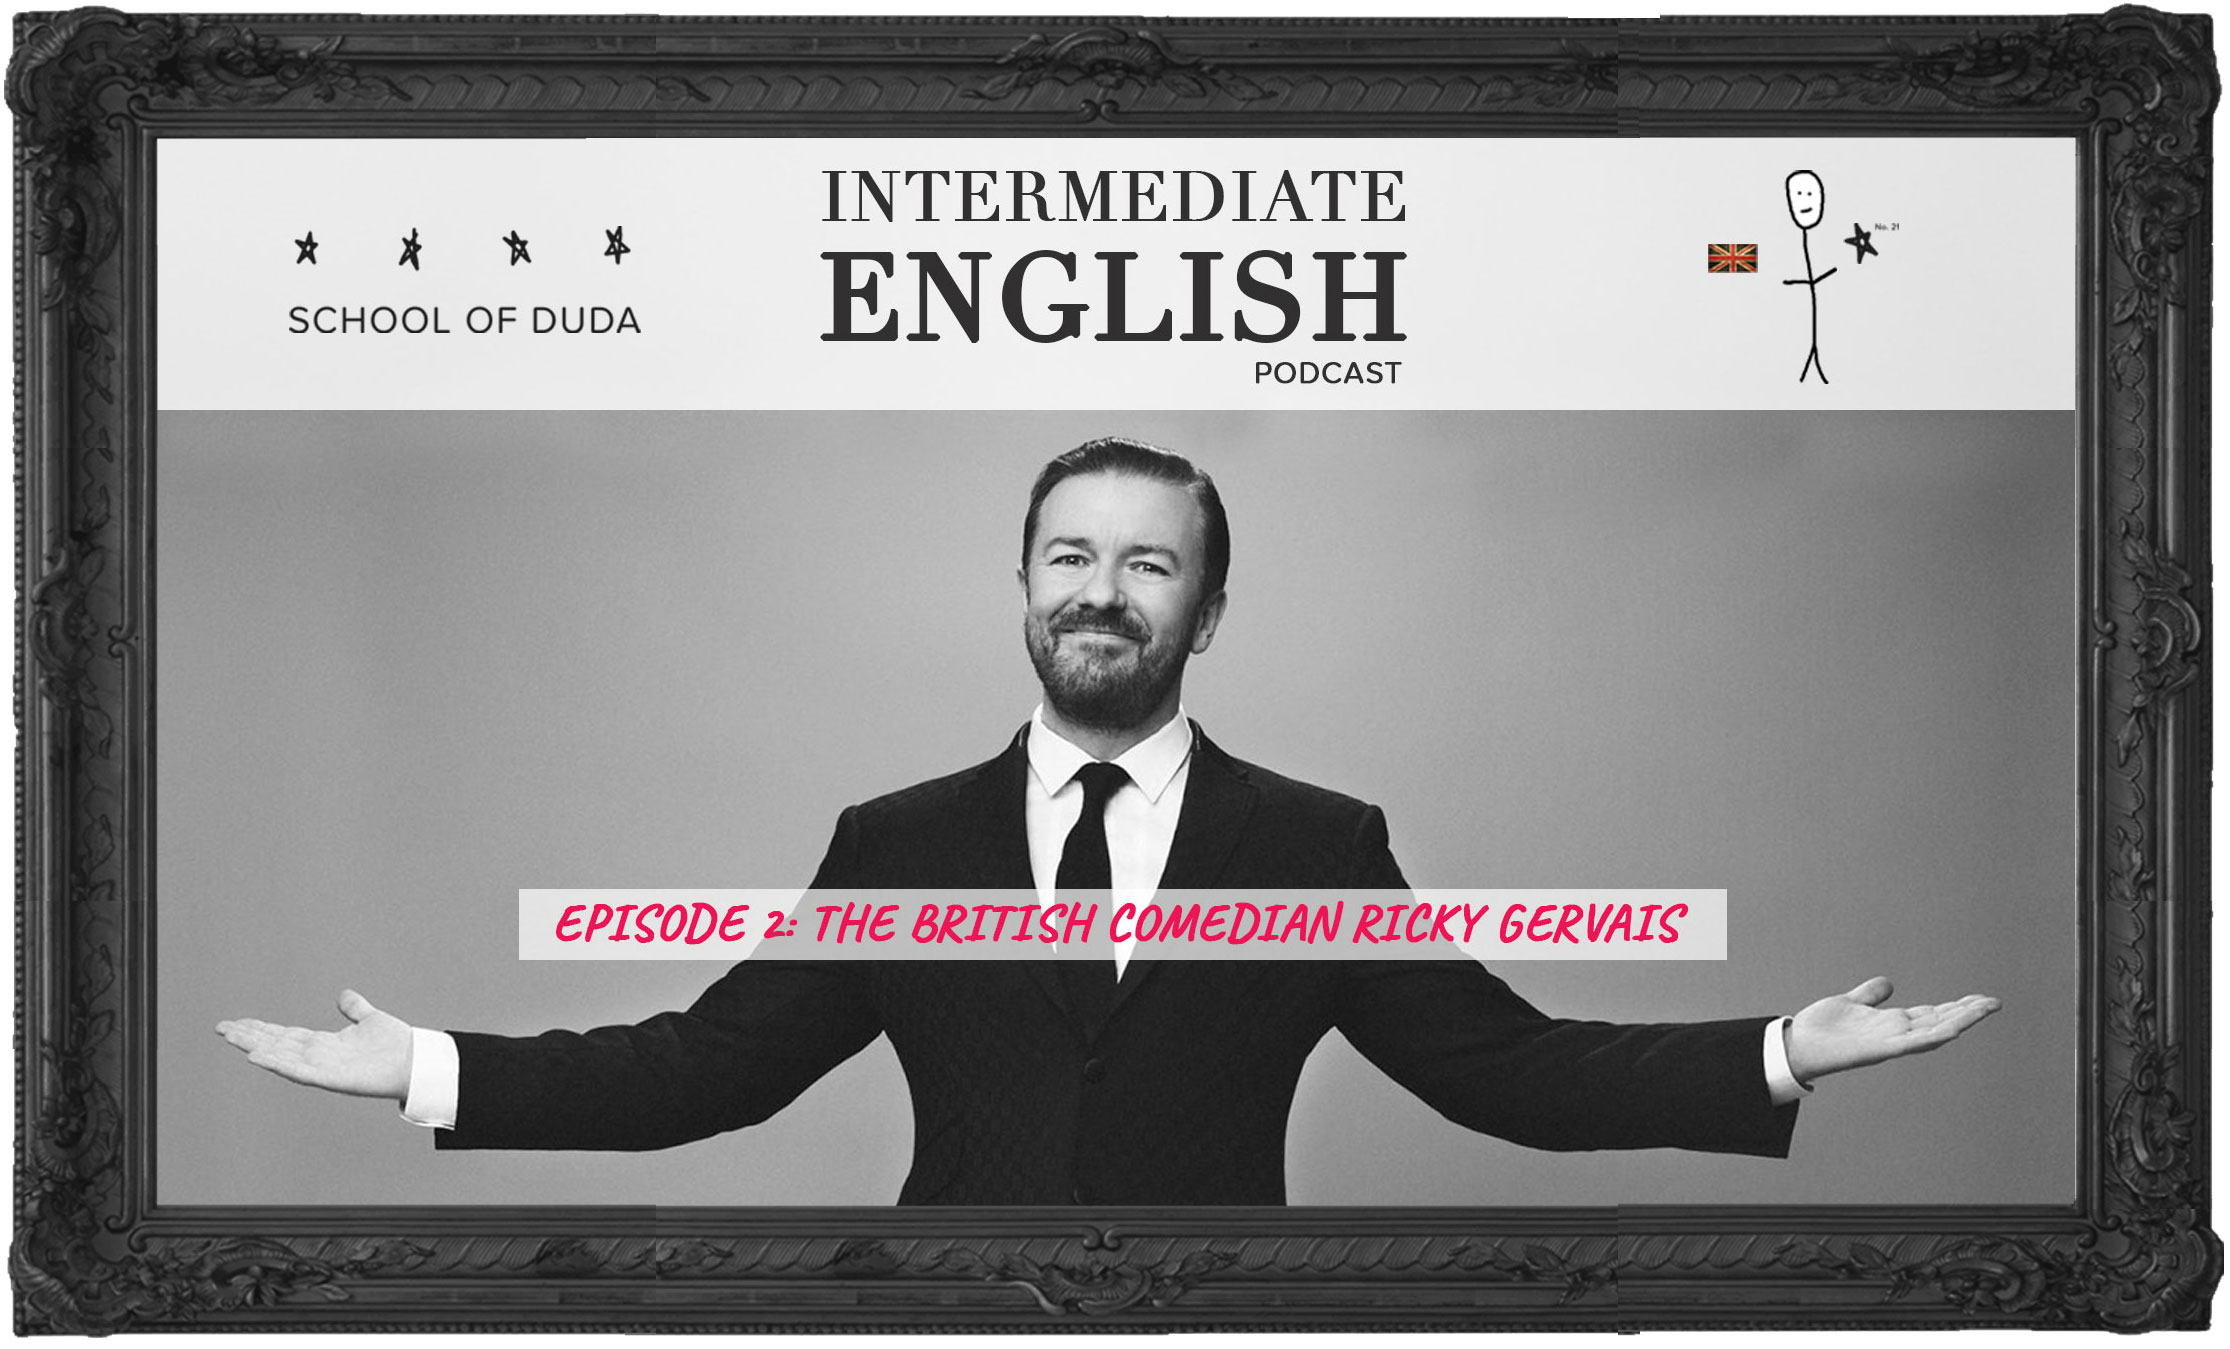 Episode 2: The British comedian Ricky Gervais